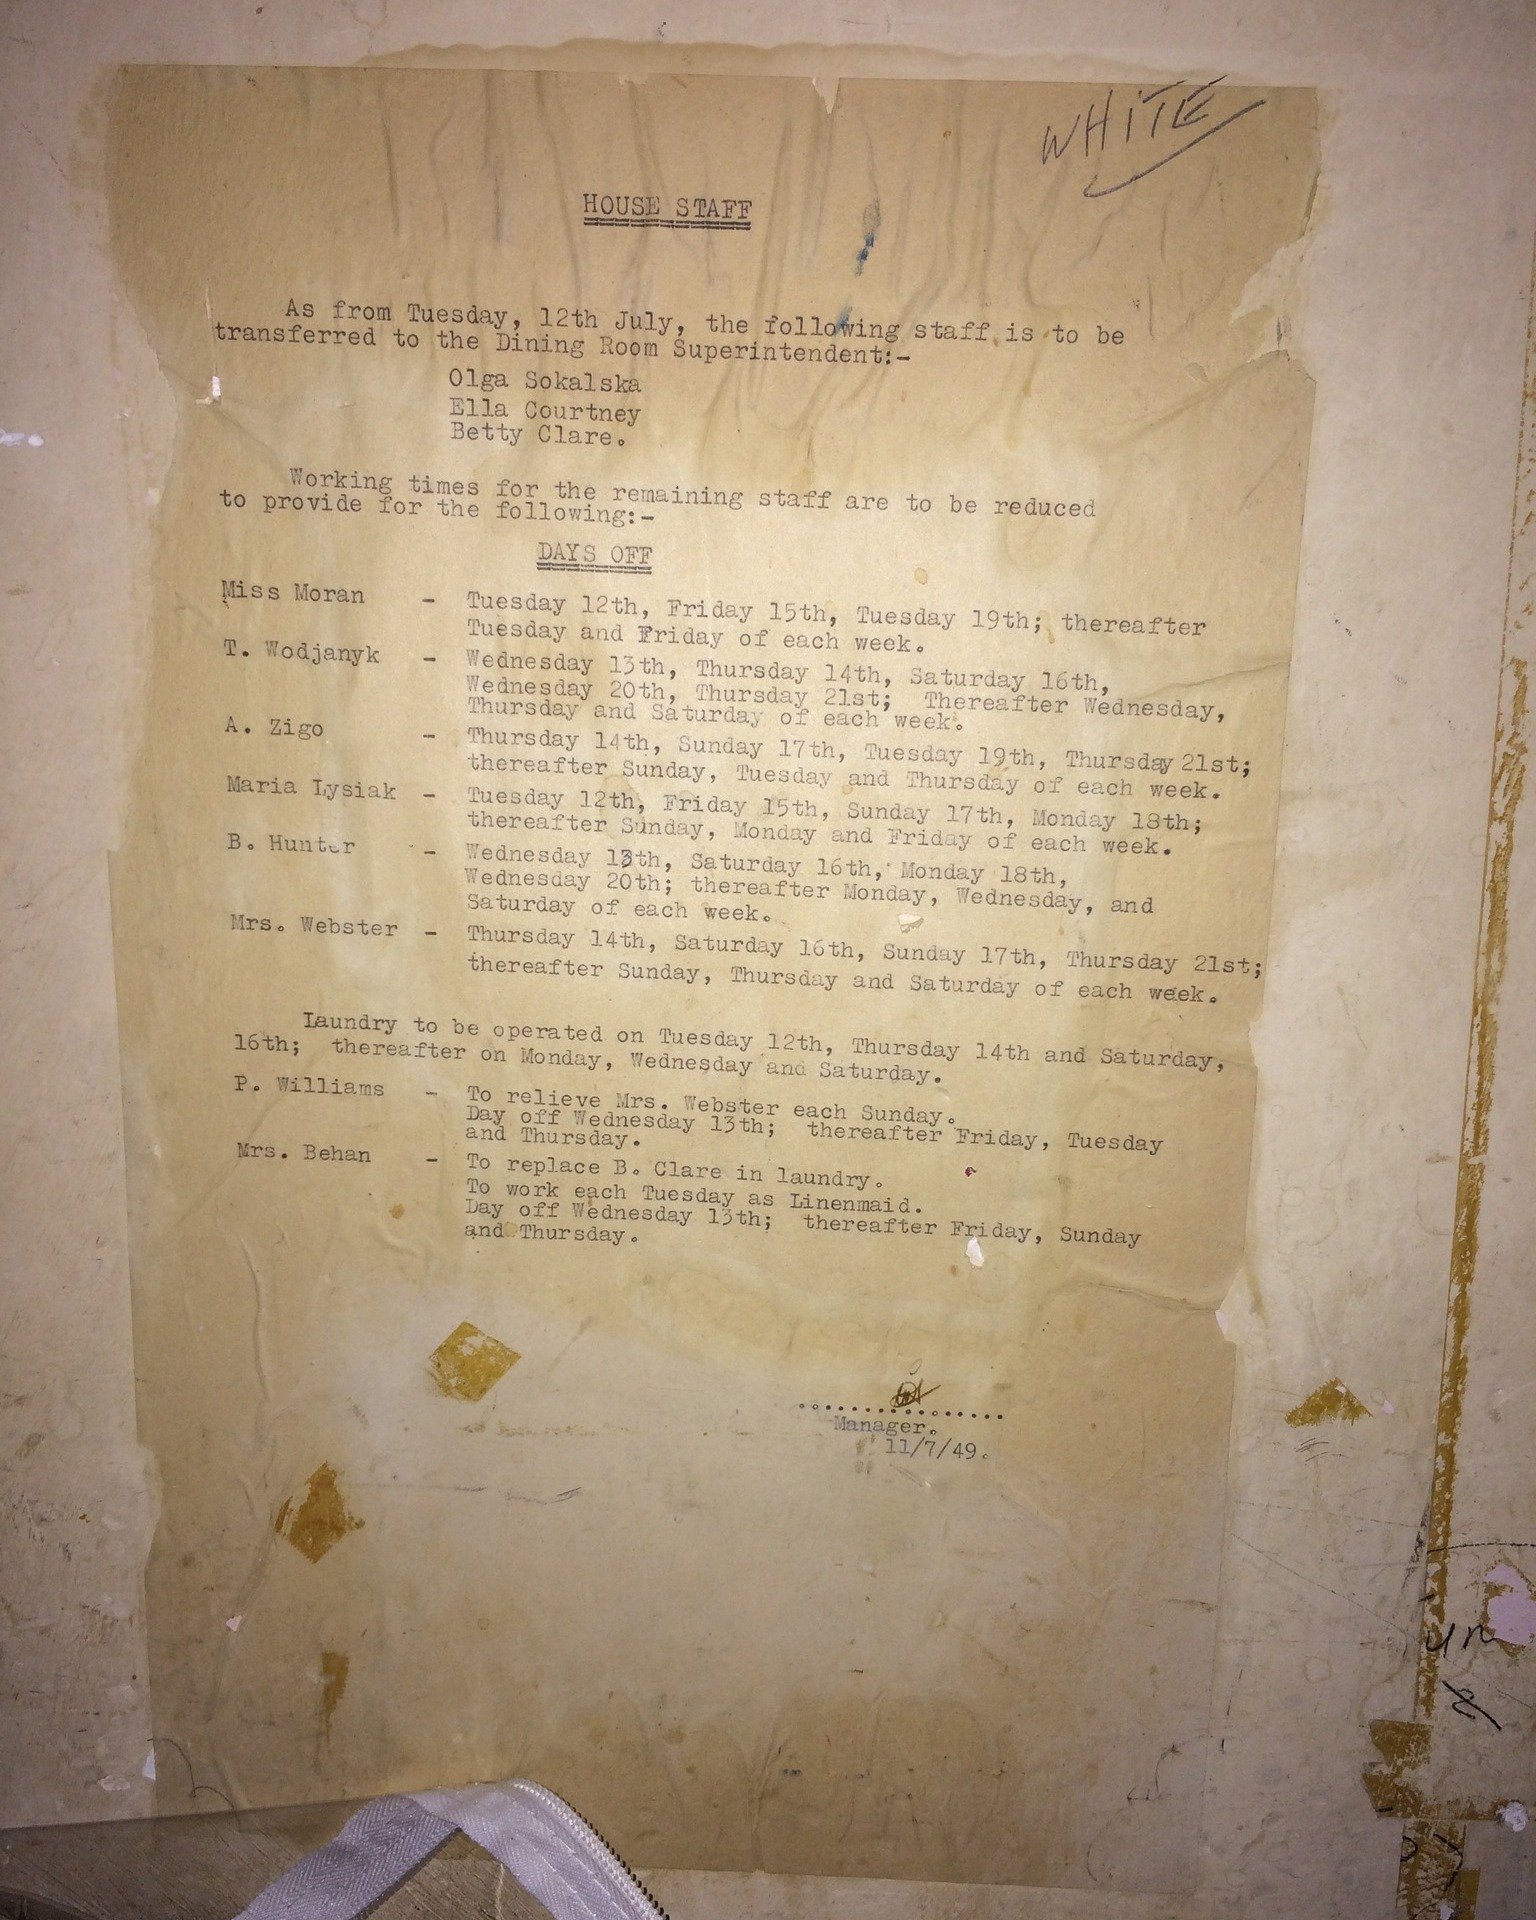 While we have been clearing out Caves House for our exciting refurbishment project, one of our staff found this stuck on the wall in the back of a cupboard.

We are excited to see what other wonderful items we can find!

📸 JenolanCaves